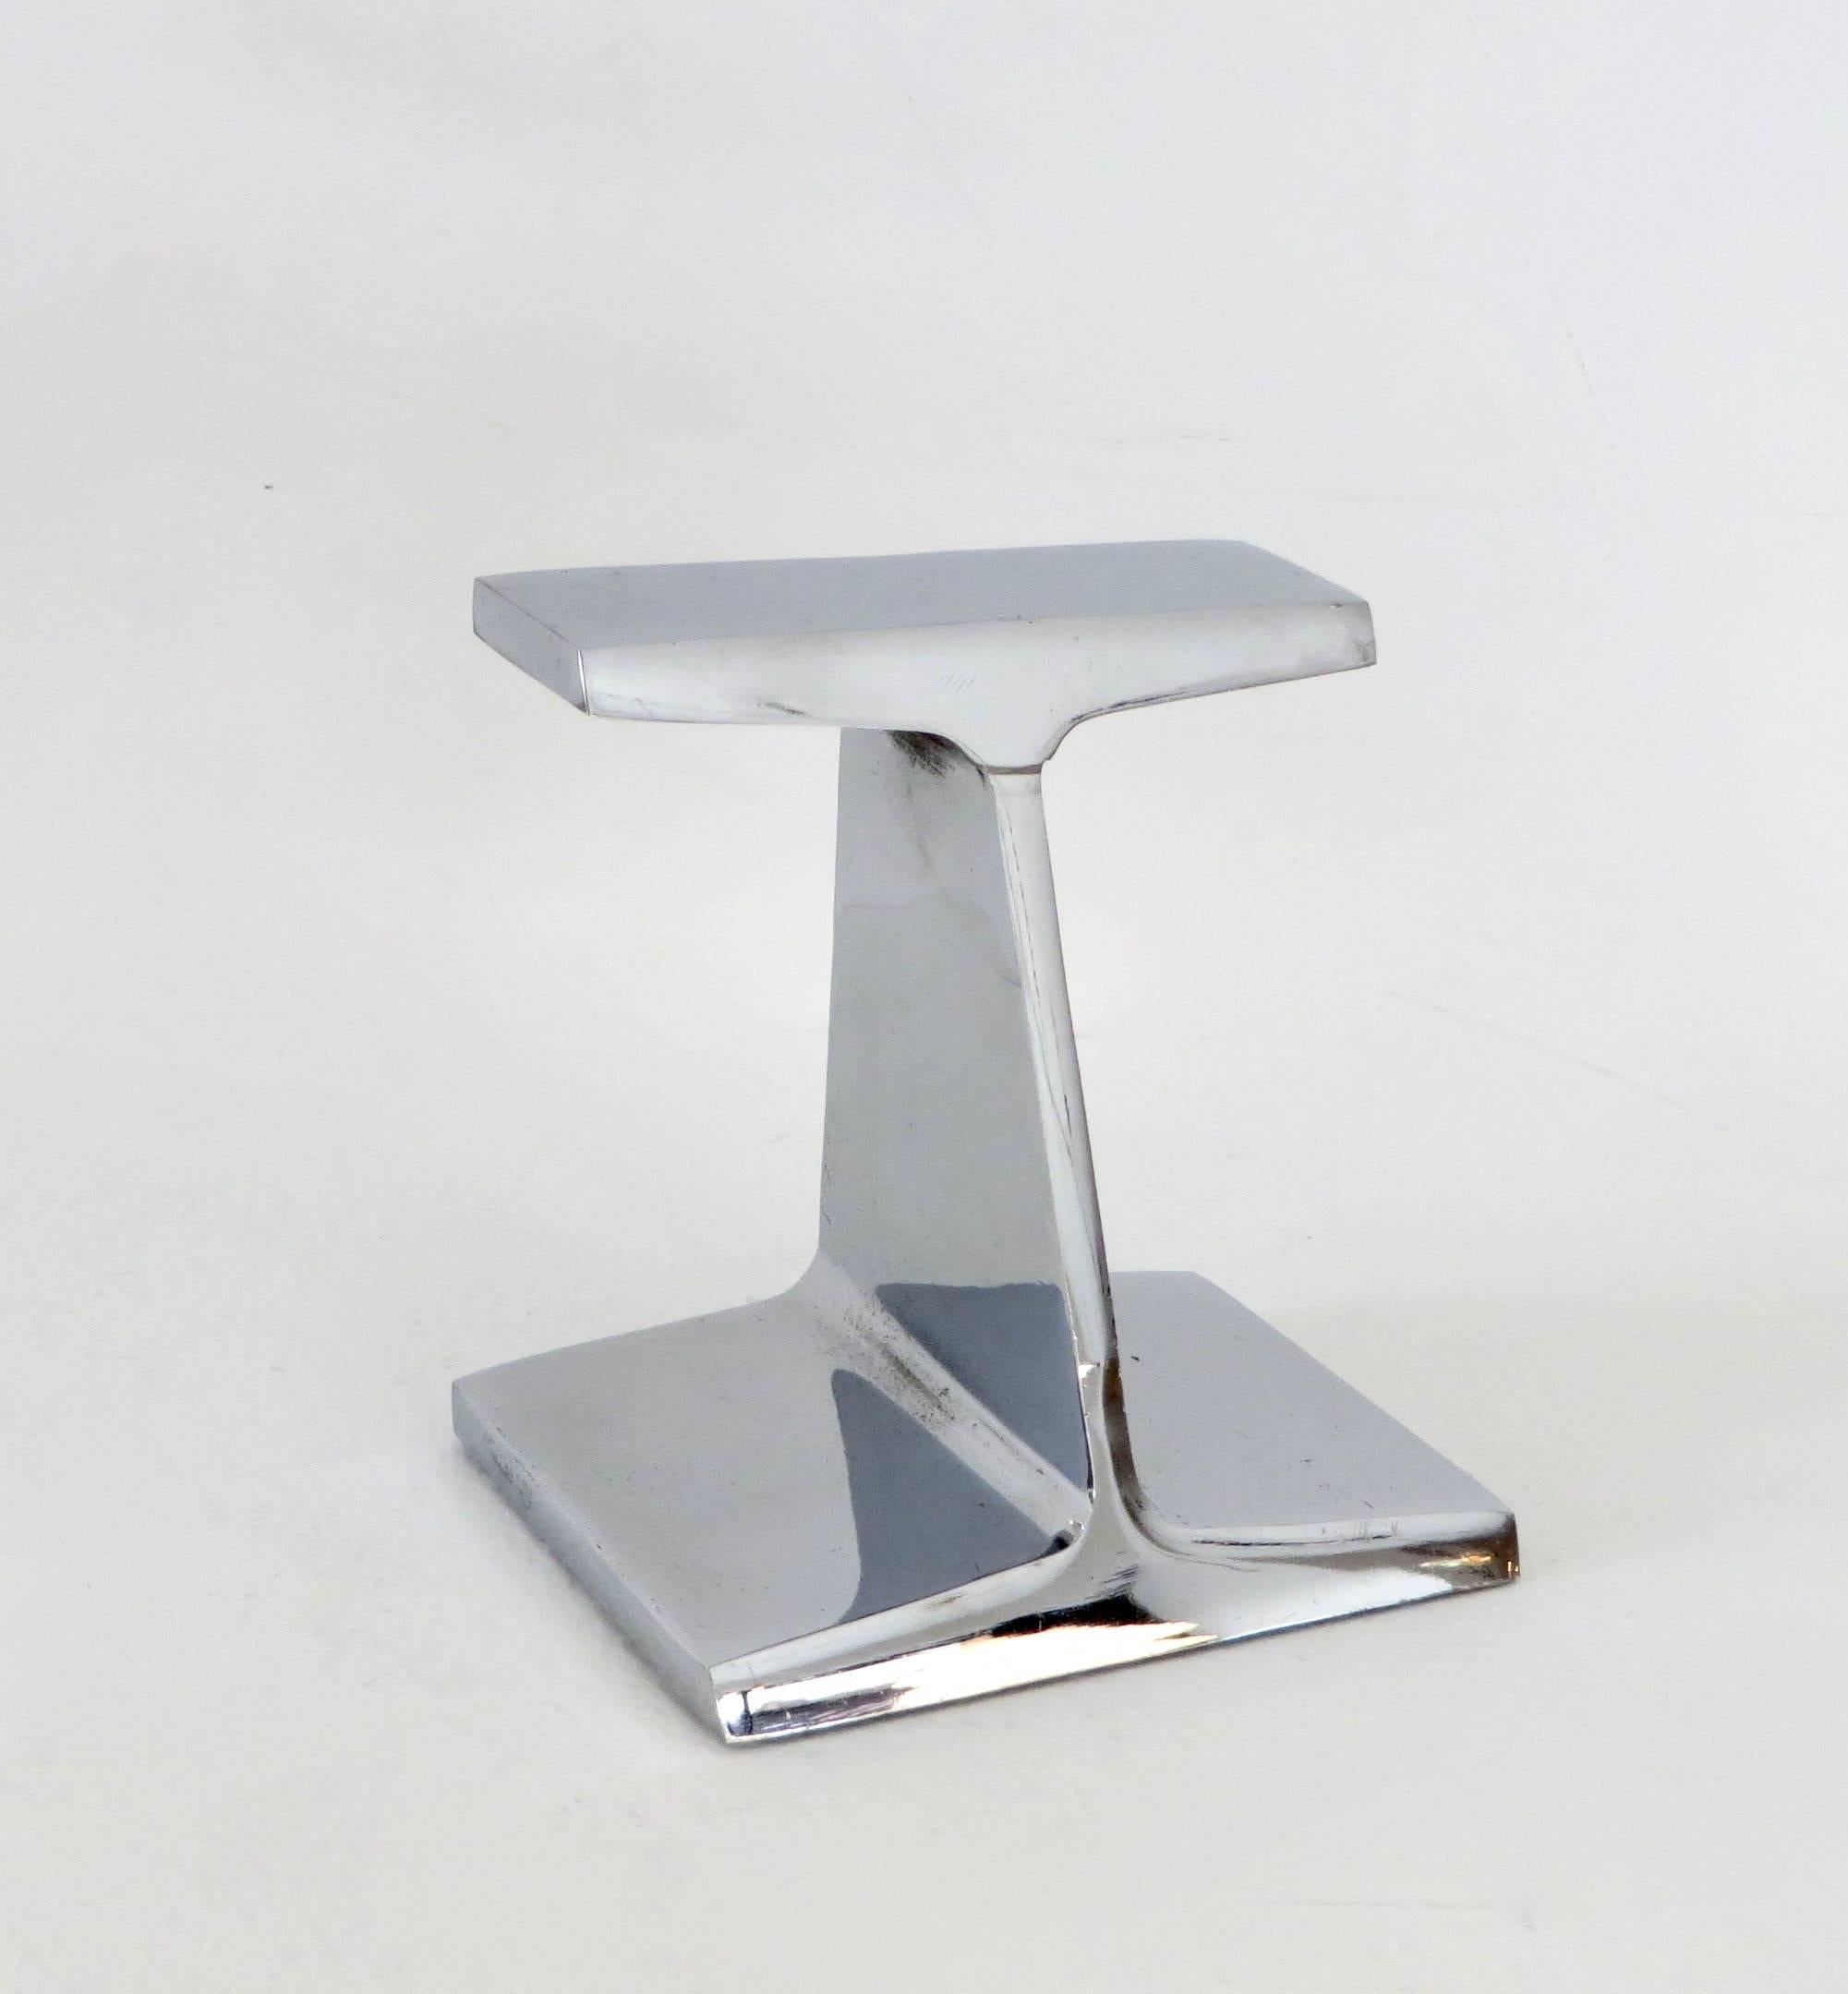 A charmed steel I beam bookend or paperweight by Kauser steel to commemorate the 25th anniversary chrome I beam bookend 1967.